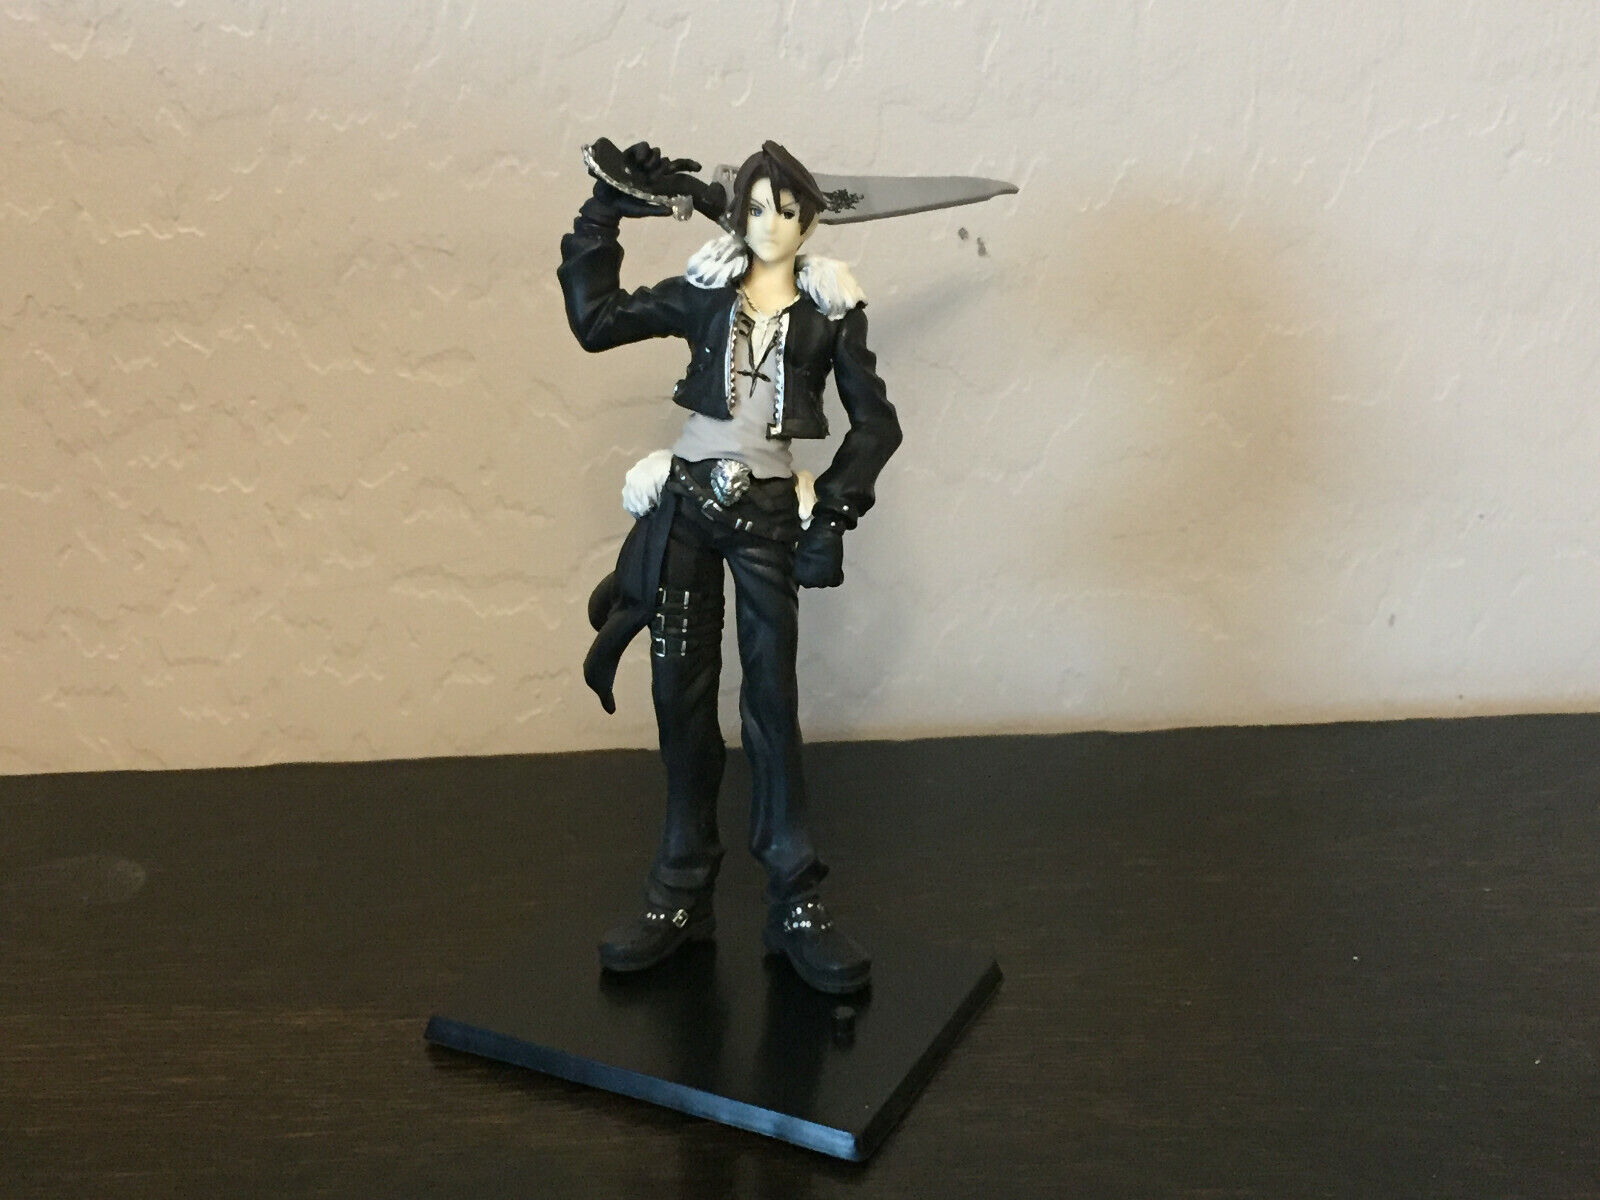 Final Fantasy VIII Squall Action Figure